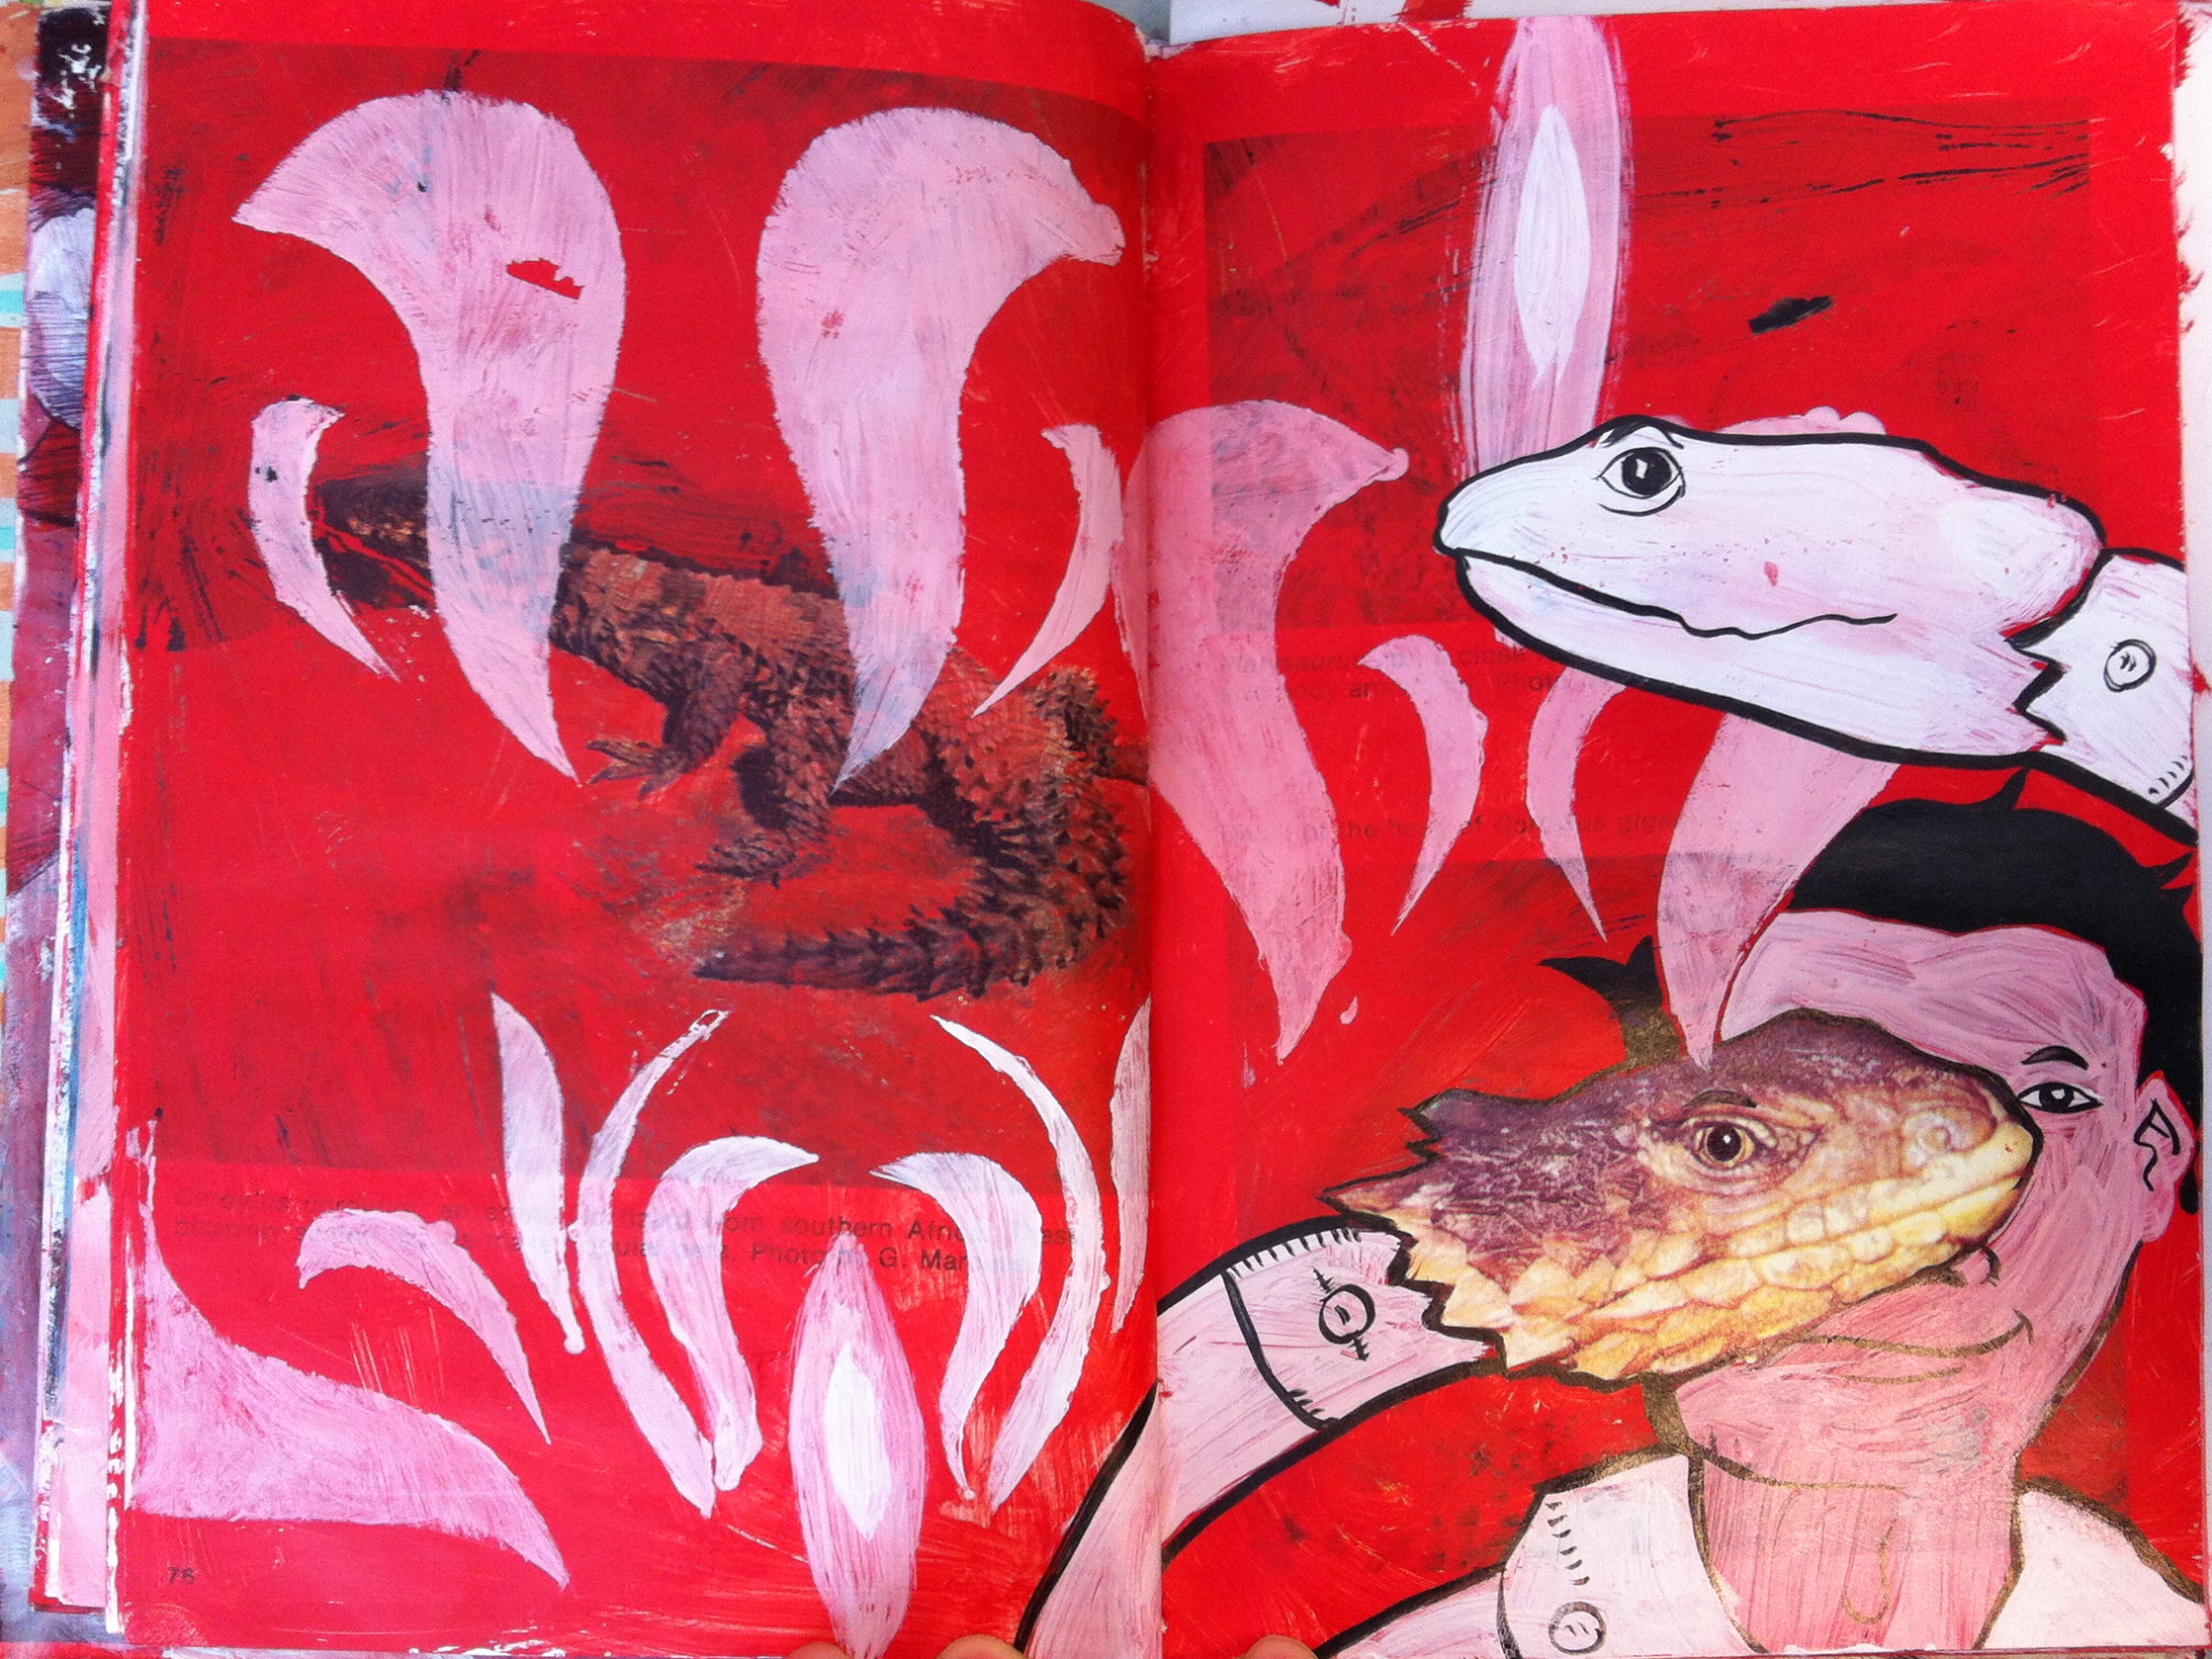 Ink drawing of lizard, on red background with white 